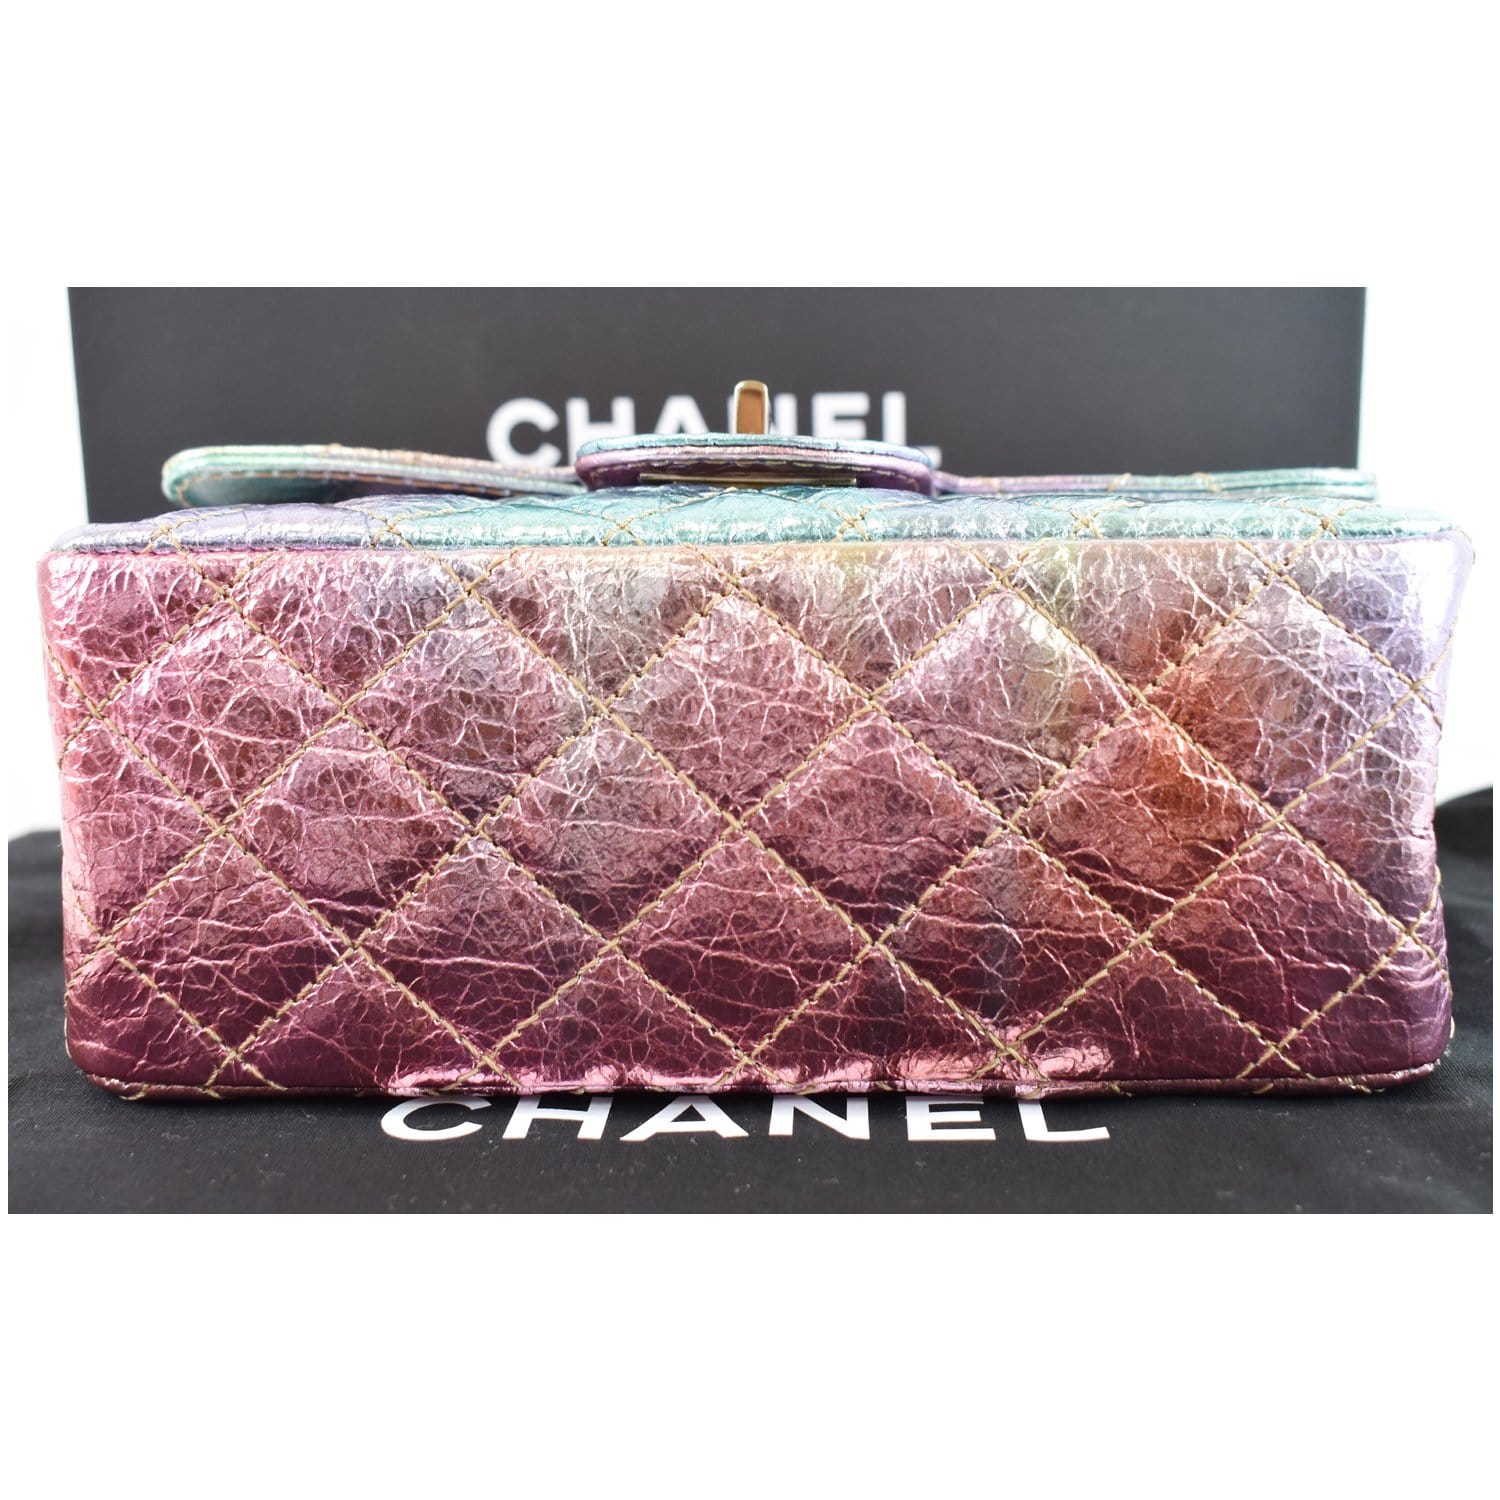 Chanel Metallic Navy Blue Quilted Leather Reissue 2.55 Classic 224 Flap Bag